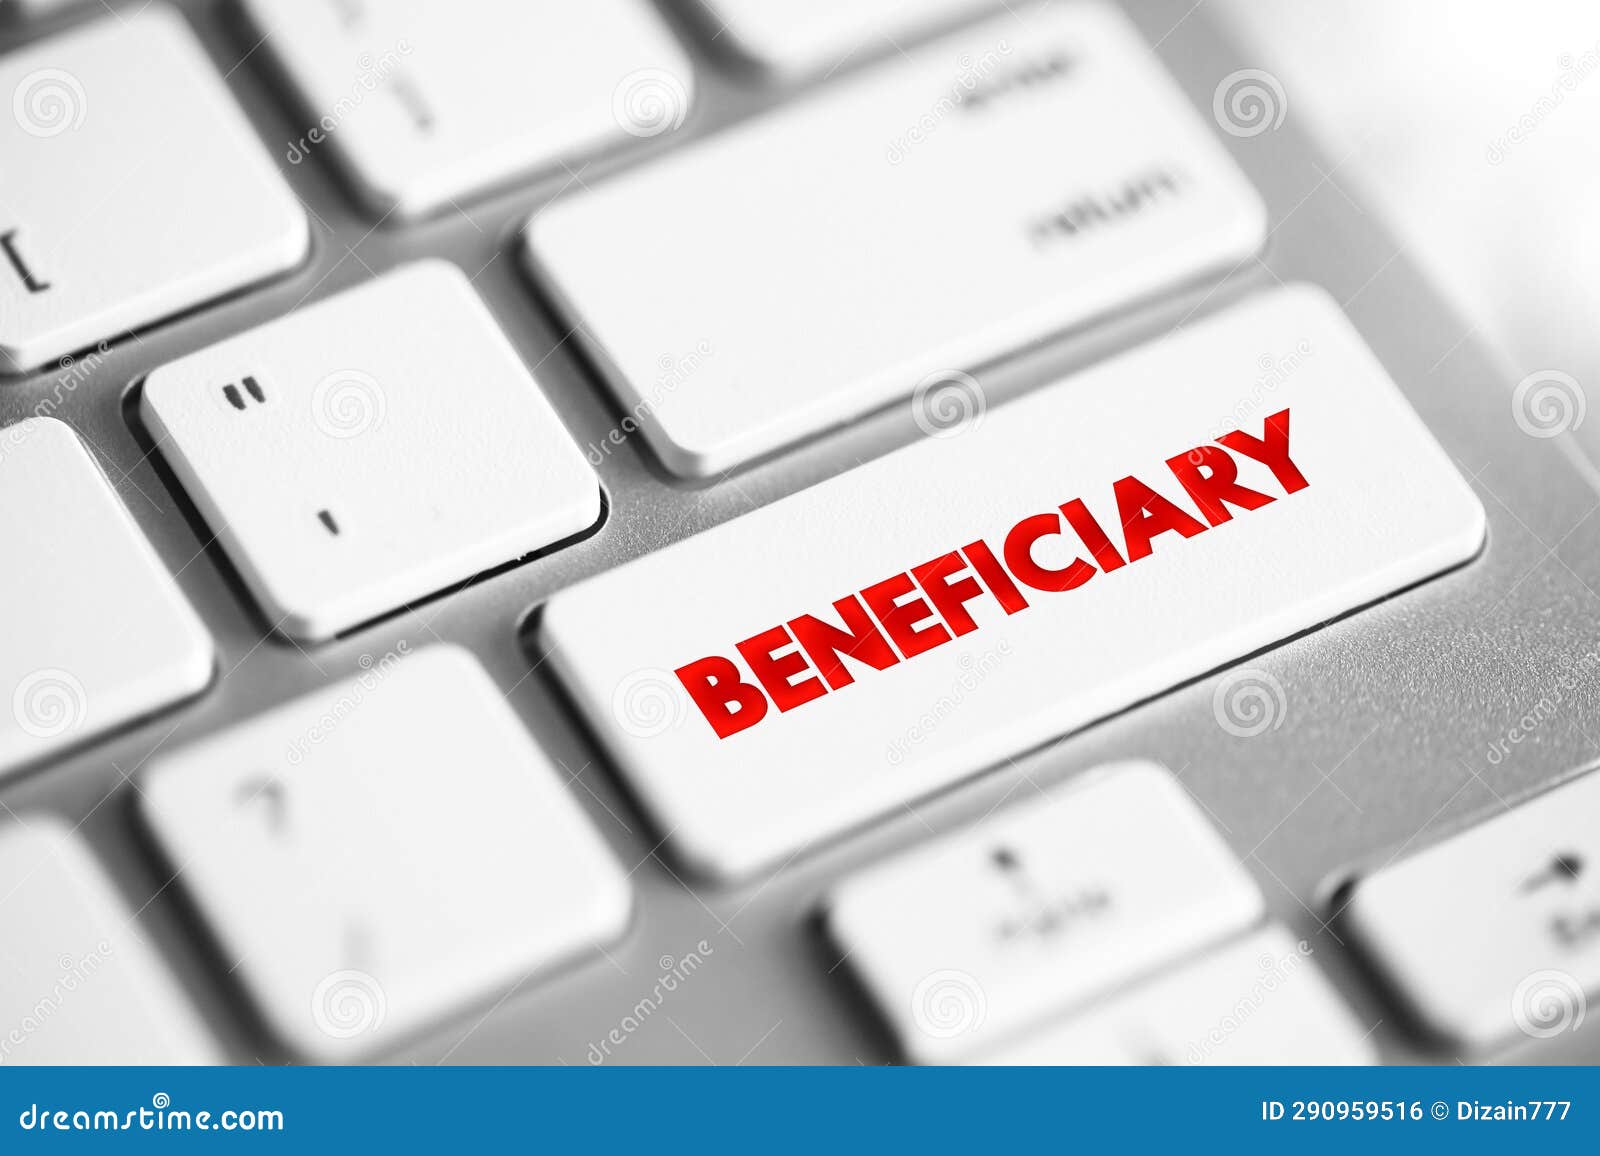 beneficiary - person or other legal entity who receives money or other benefits from a benefactor, text concept button on keyboard